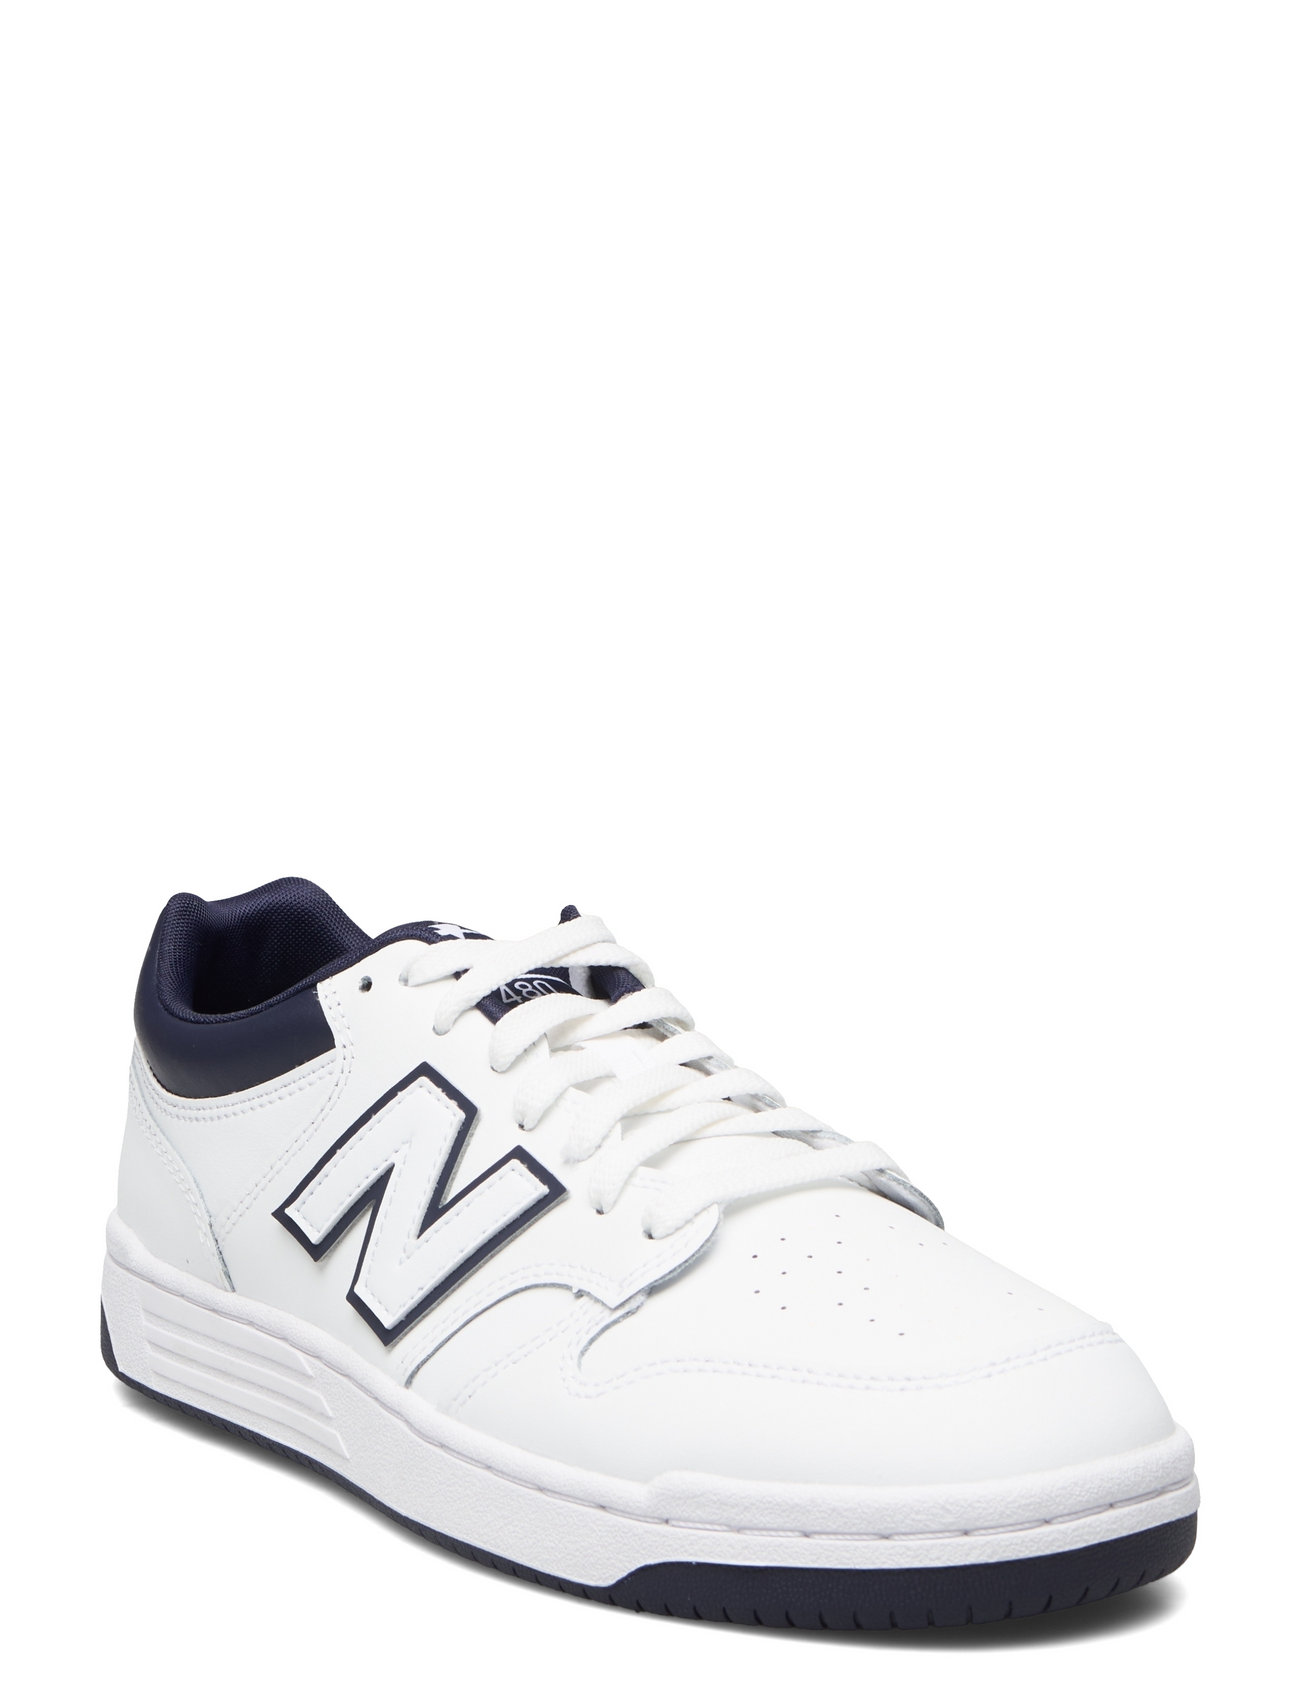 New Balance Bb480 Sport Sneakers Low-top Sneakers White New Balance